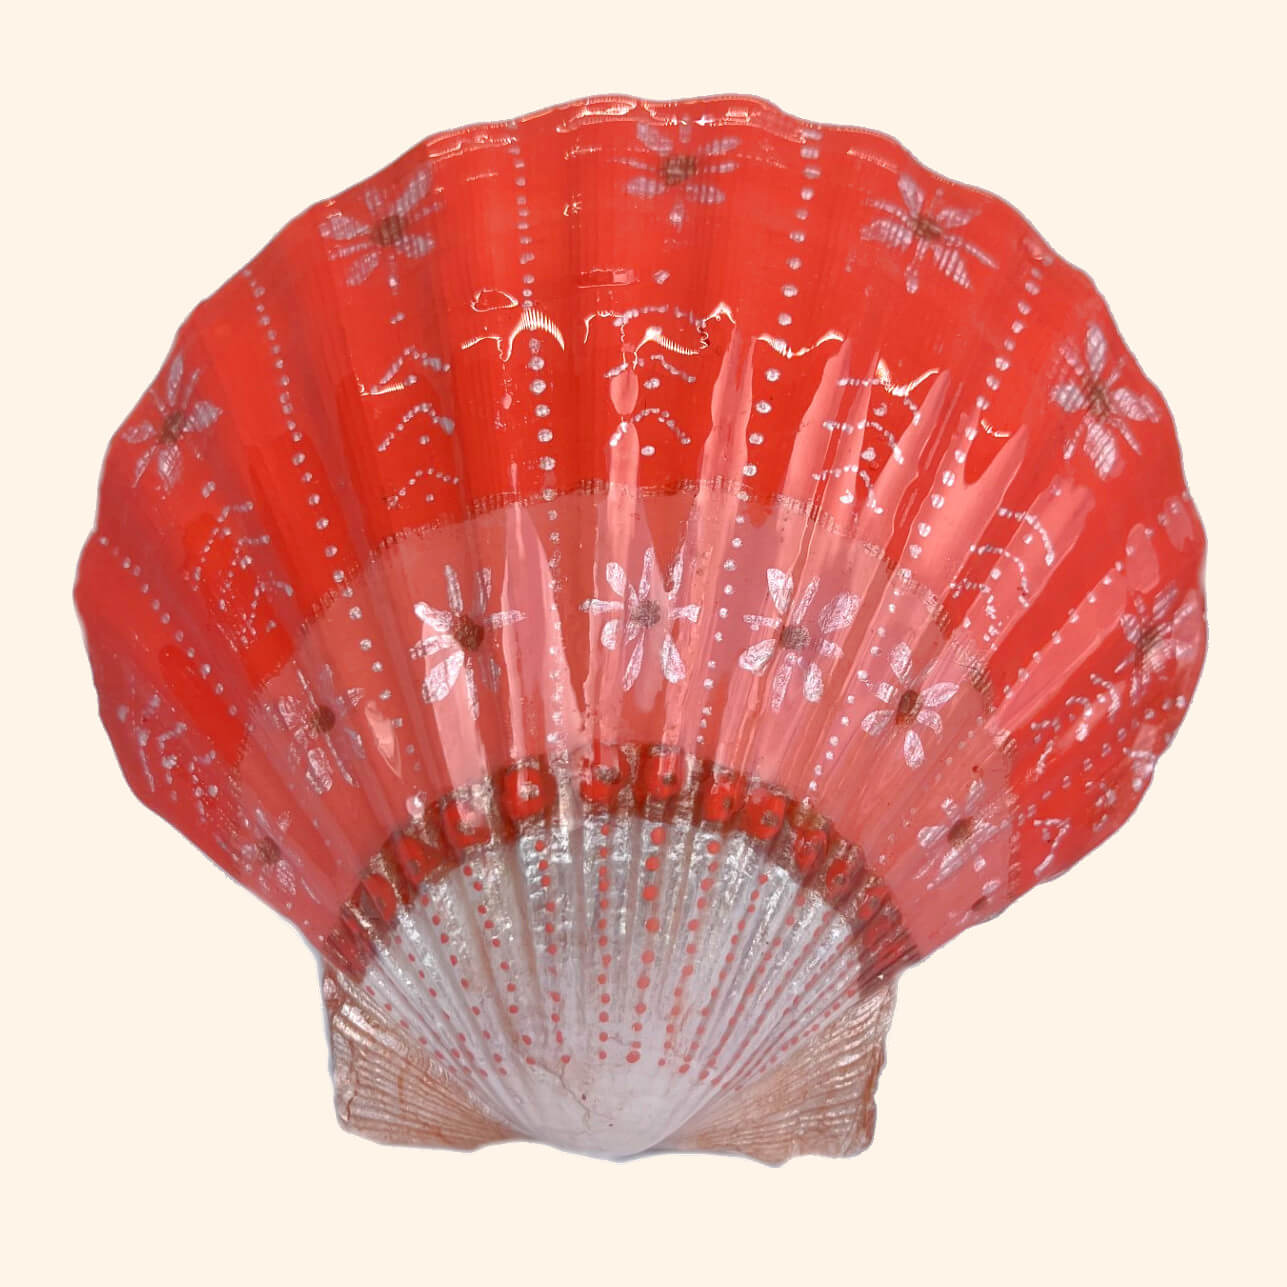 Real Scallop Shells 5 Pack Genuine Seashells 1-3/4 to 3 37751